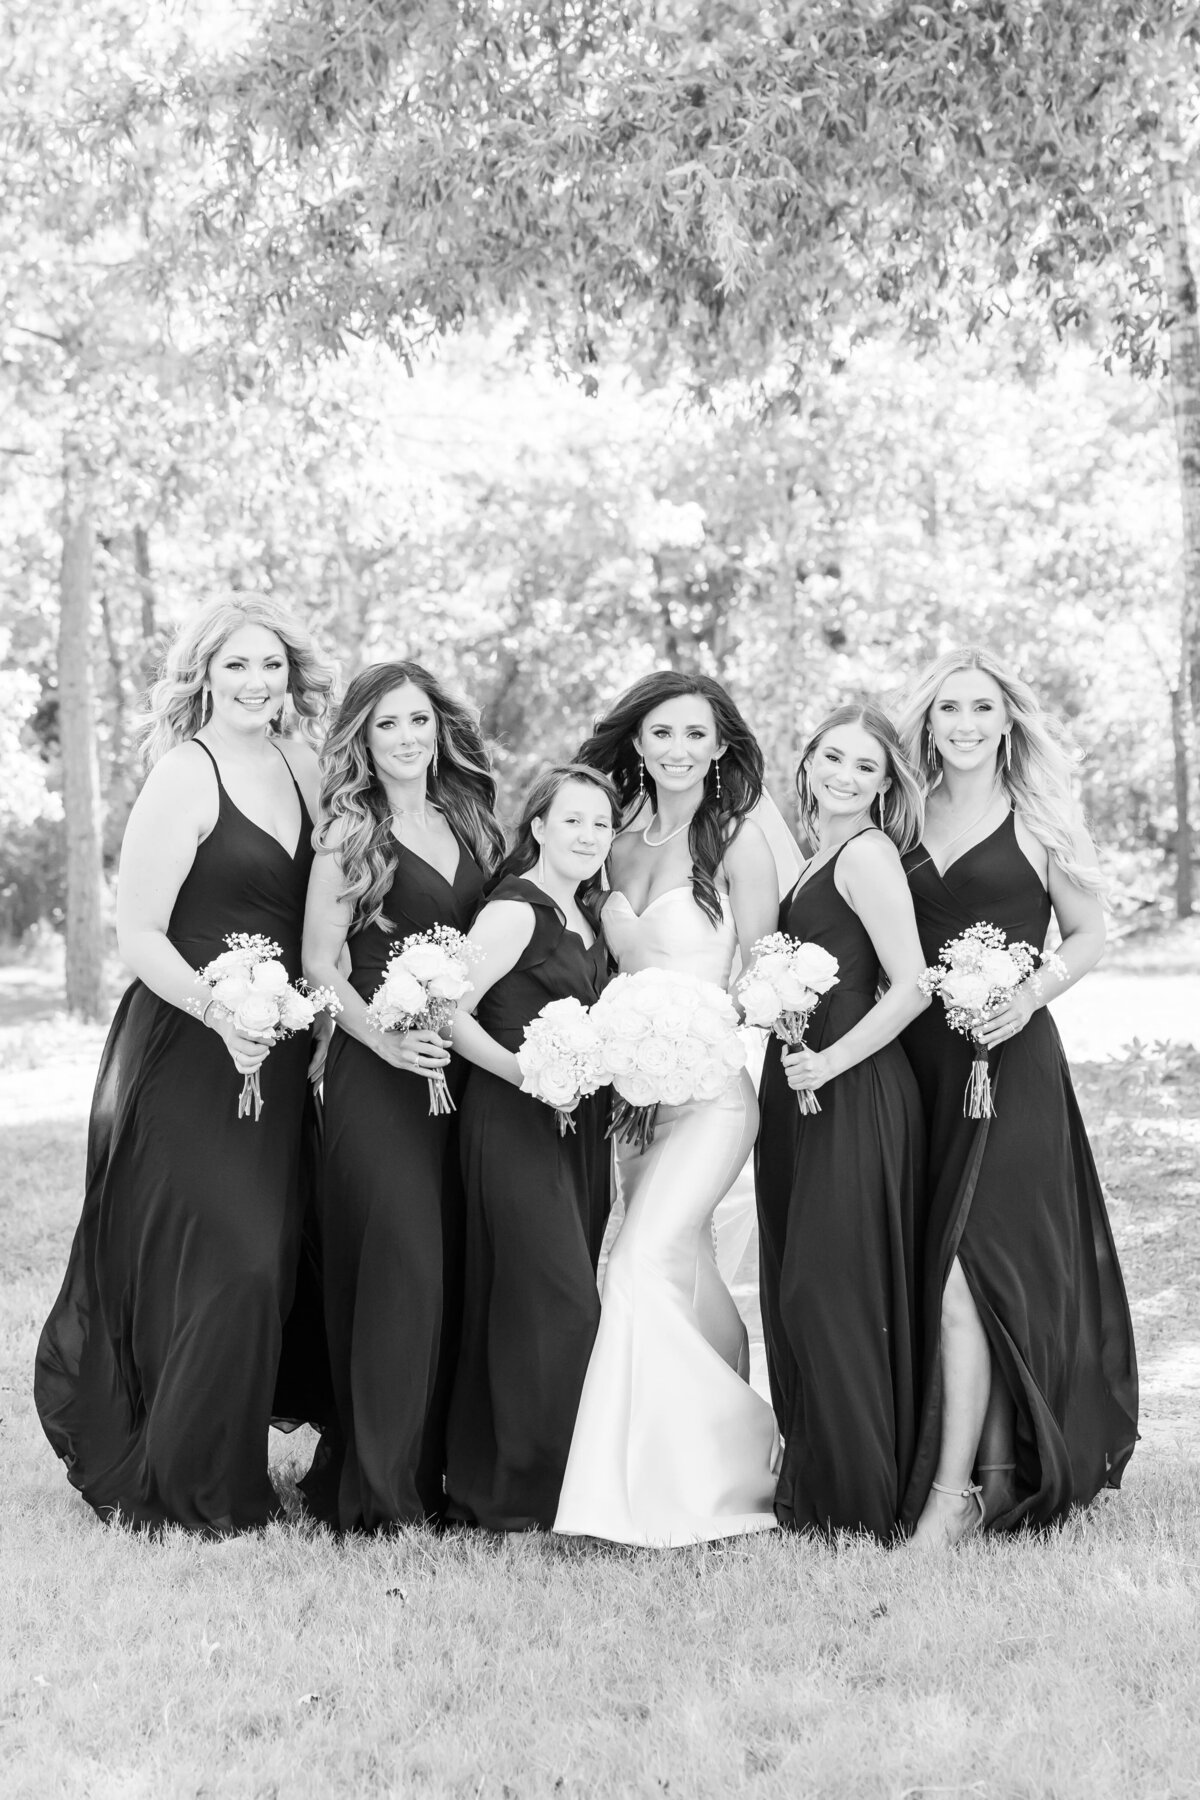 Black and white image of a bride and her bridesmaids standing among the trees.